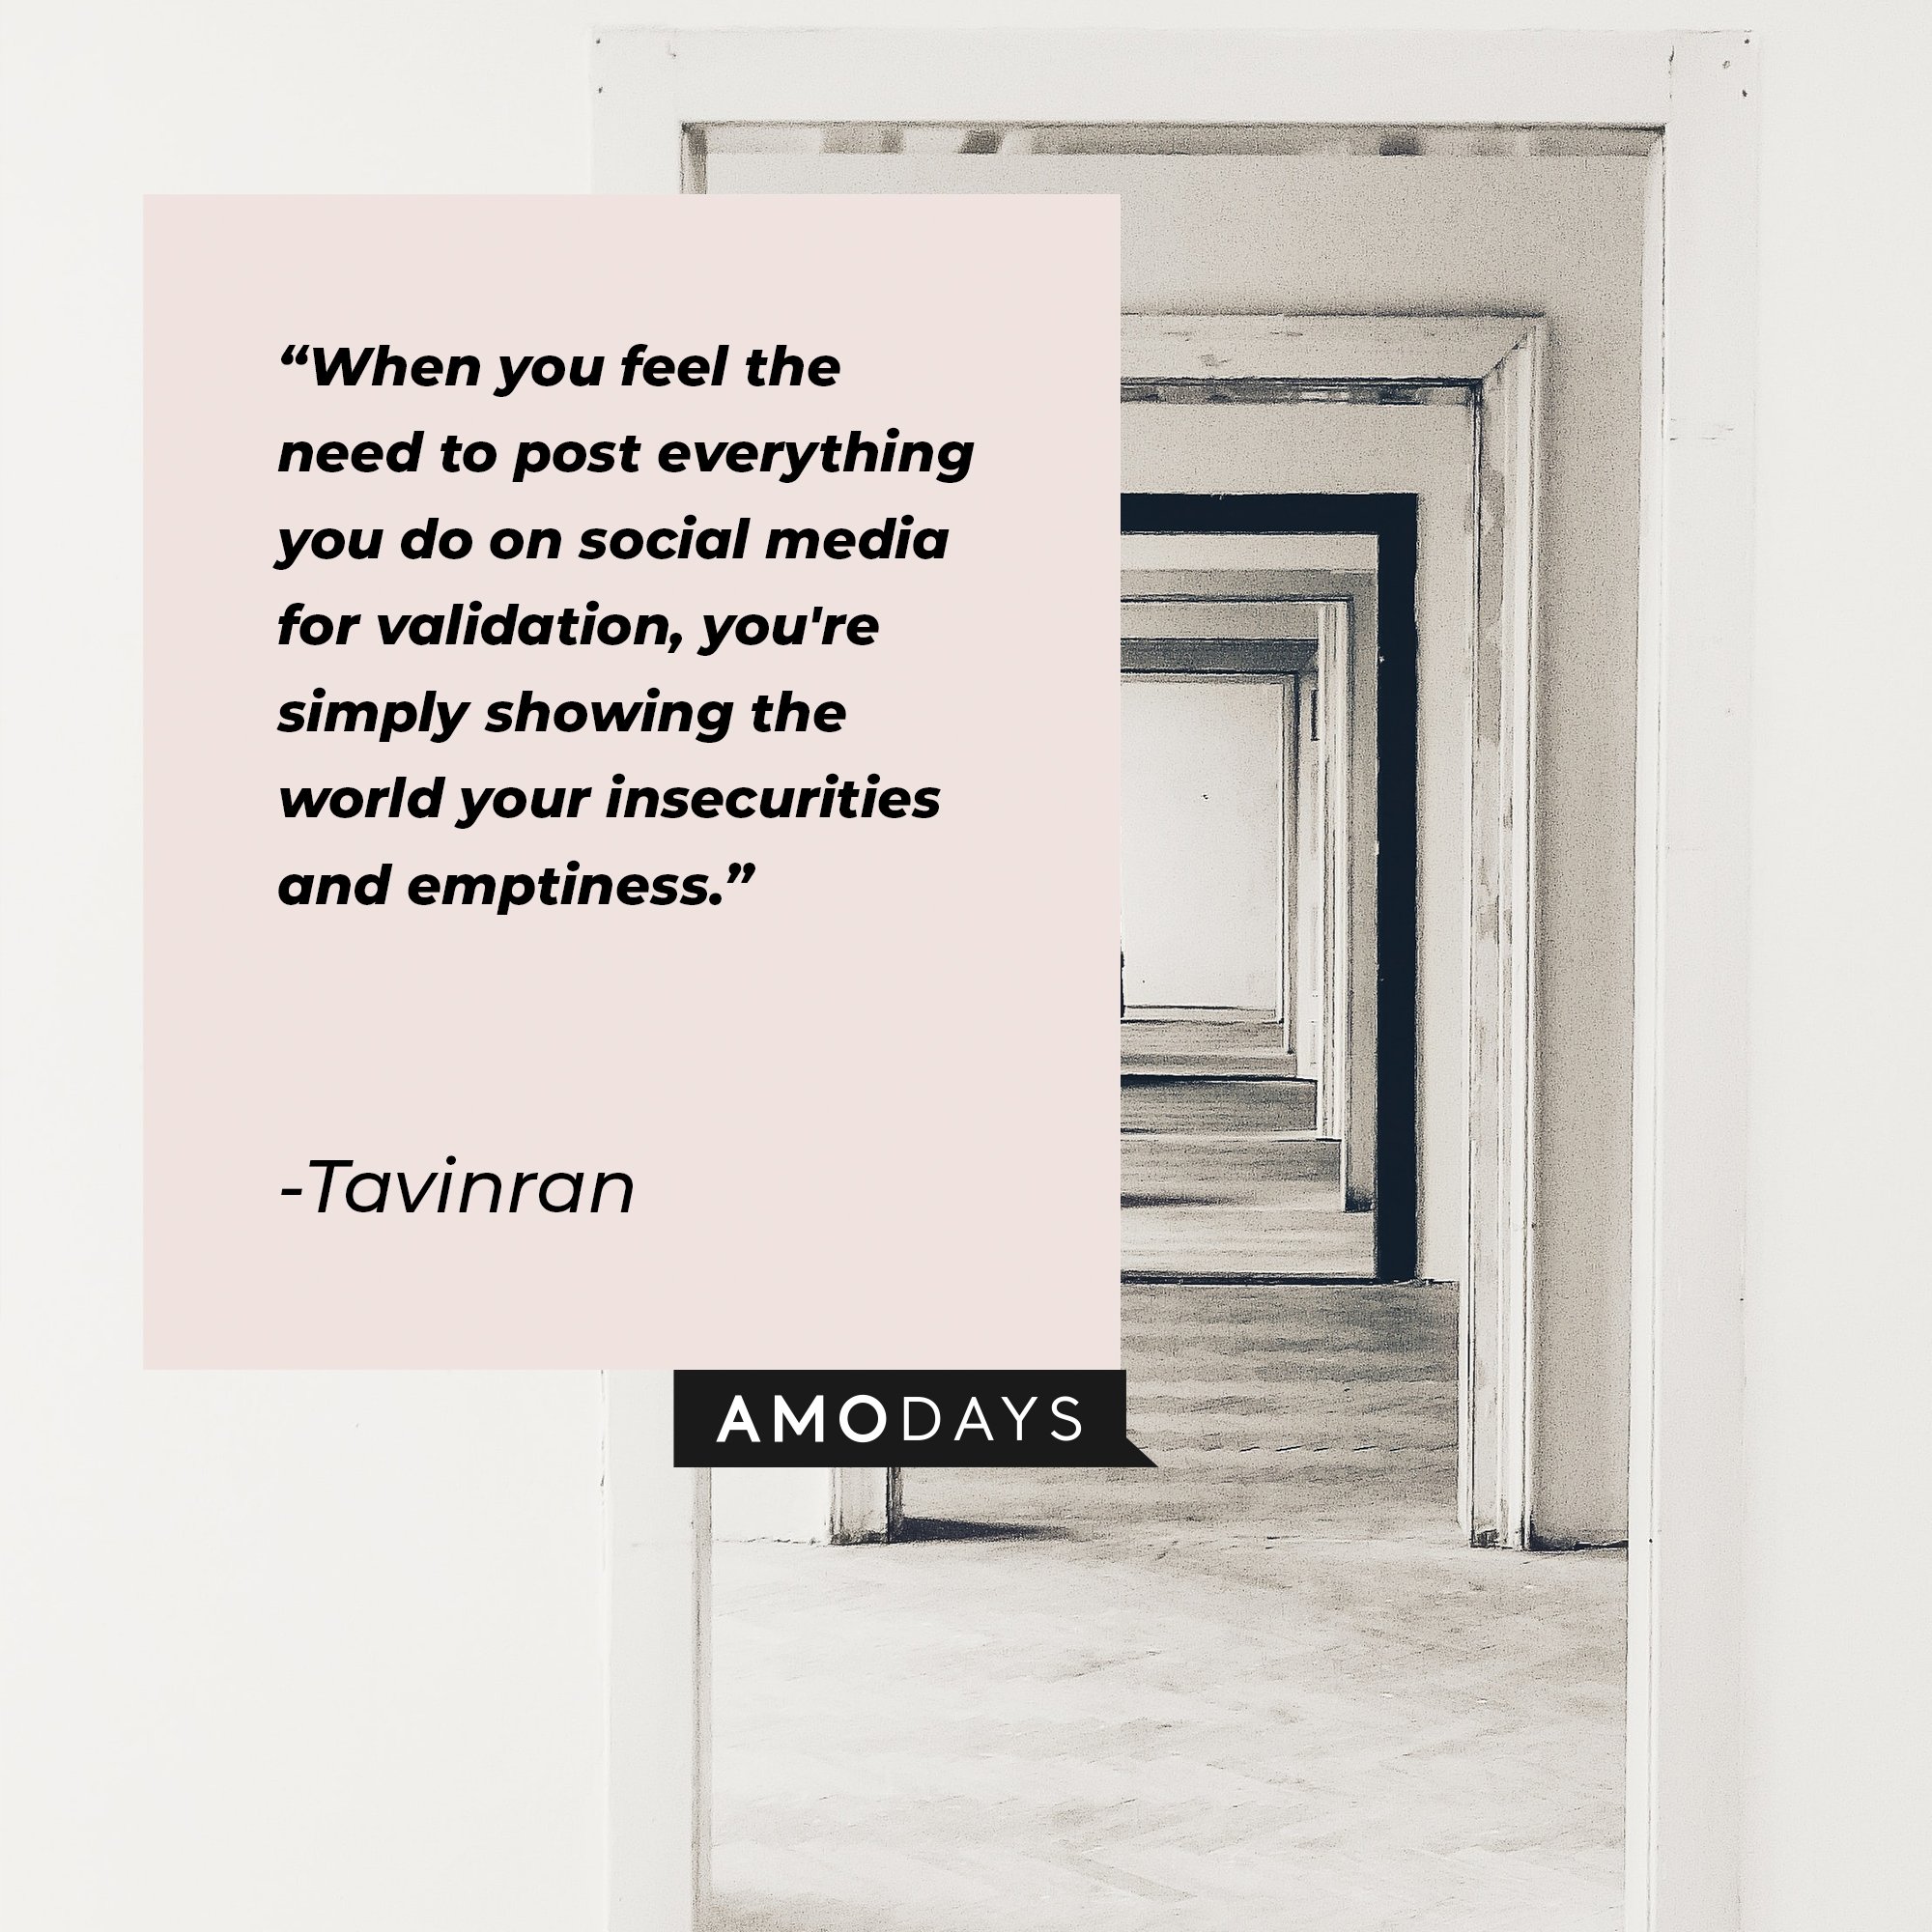 Tavinran’s quote: "When you feel the need to post everything you do on social media for validation, you're simply showing the world your insecurities and emptiness." | Image: AmoDays